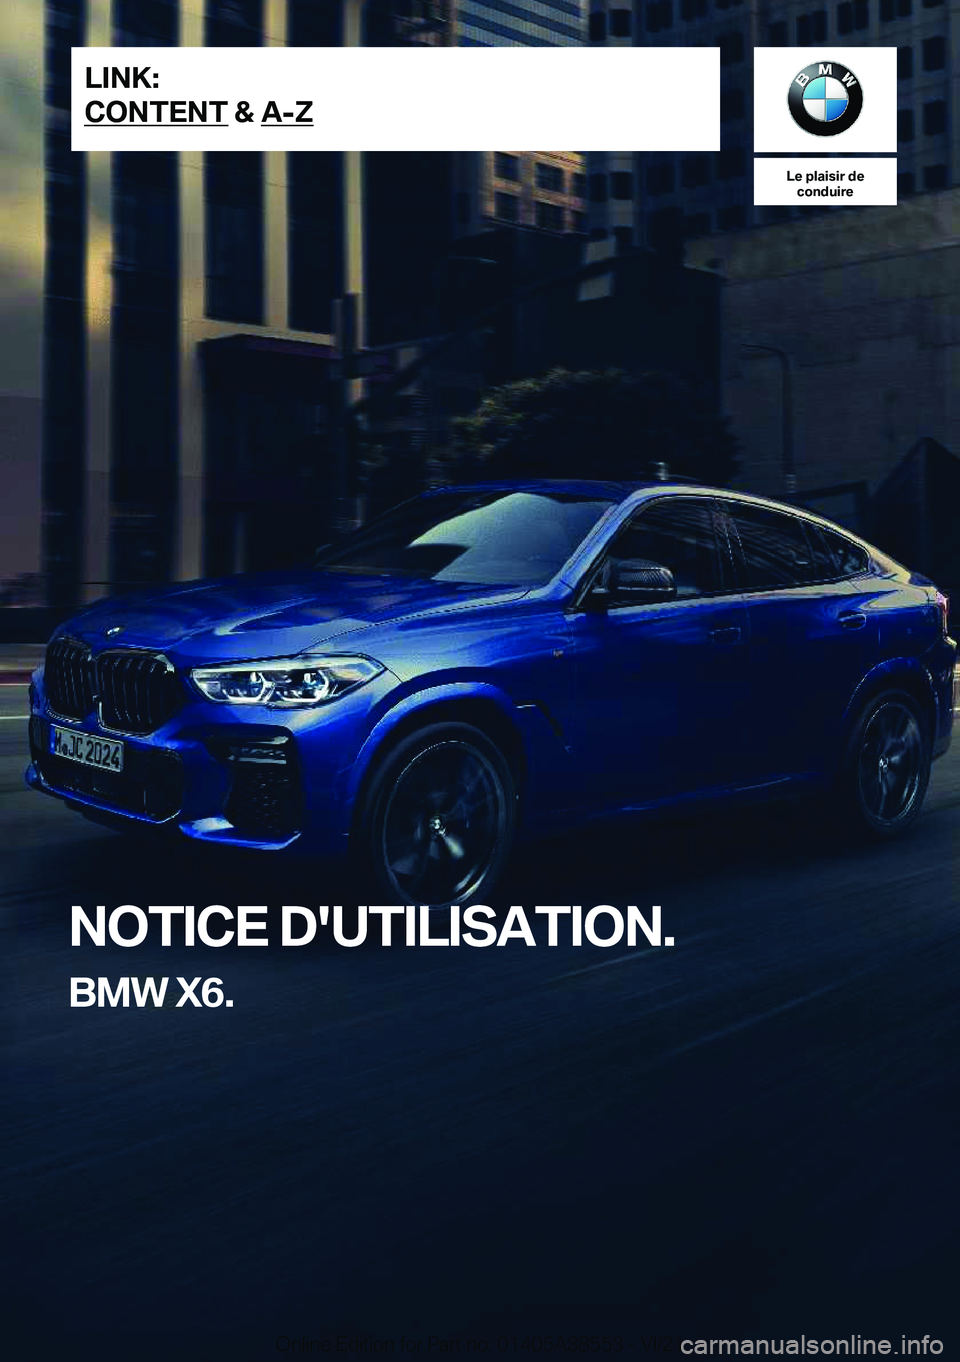 BMW X6 2022  Notices Demploi (in French) �L�e��p�l�a�i�s�i�r��d�e�c�o�n�d�u�i�r�e
�N�O�T�I�C�E��D�'�U�T�I�L�I�S�A�T�I�O�N�.
�B�M�W��X�6�.�L�I�N�K�:
�C�O�N�T�E�N�T��&��A�-�Z�O�n�l�i�n�e��E�d�i�t�i�o�n��f�o�r��P�a�r�t��n�o�.��0�